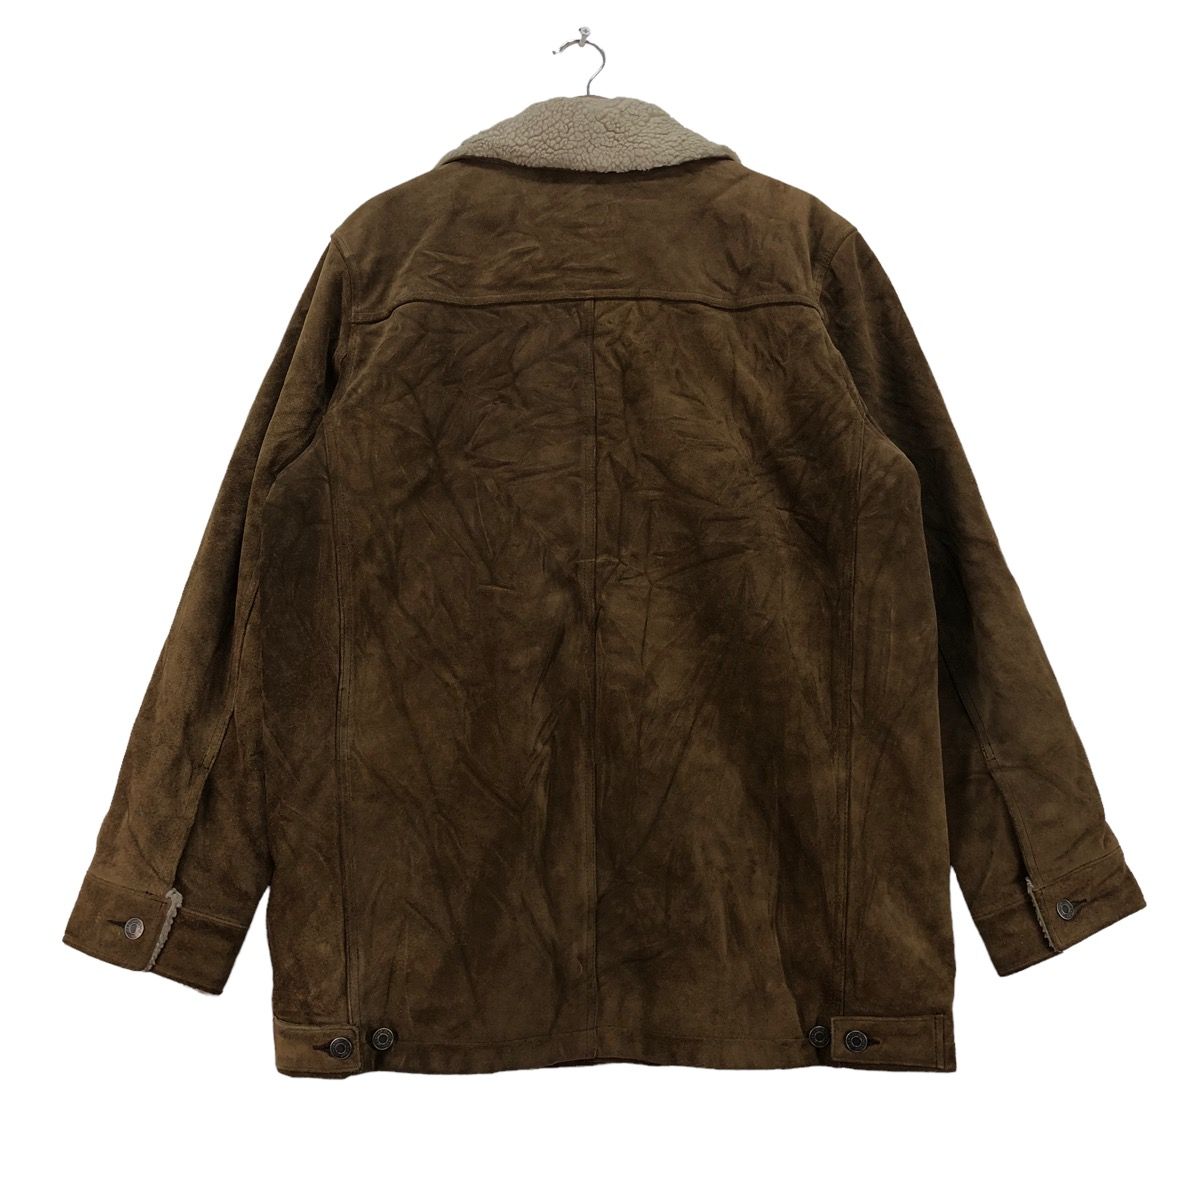 Genuine Leather - Gap Suede Leather Sherpa Jacket - 3